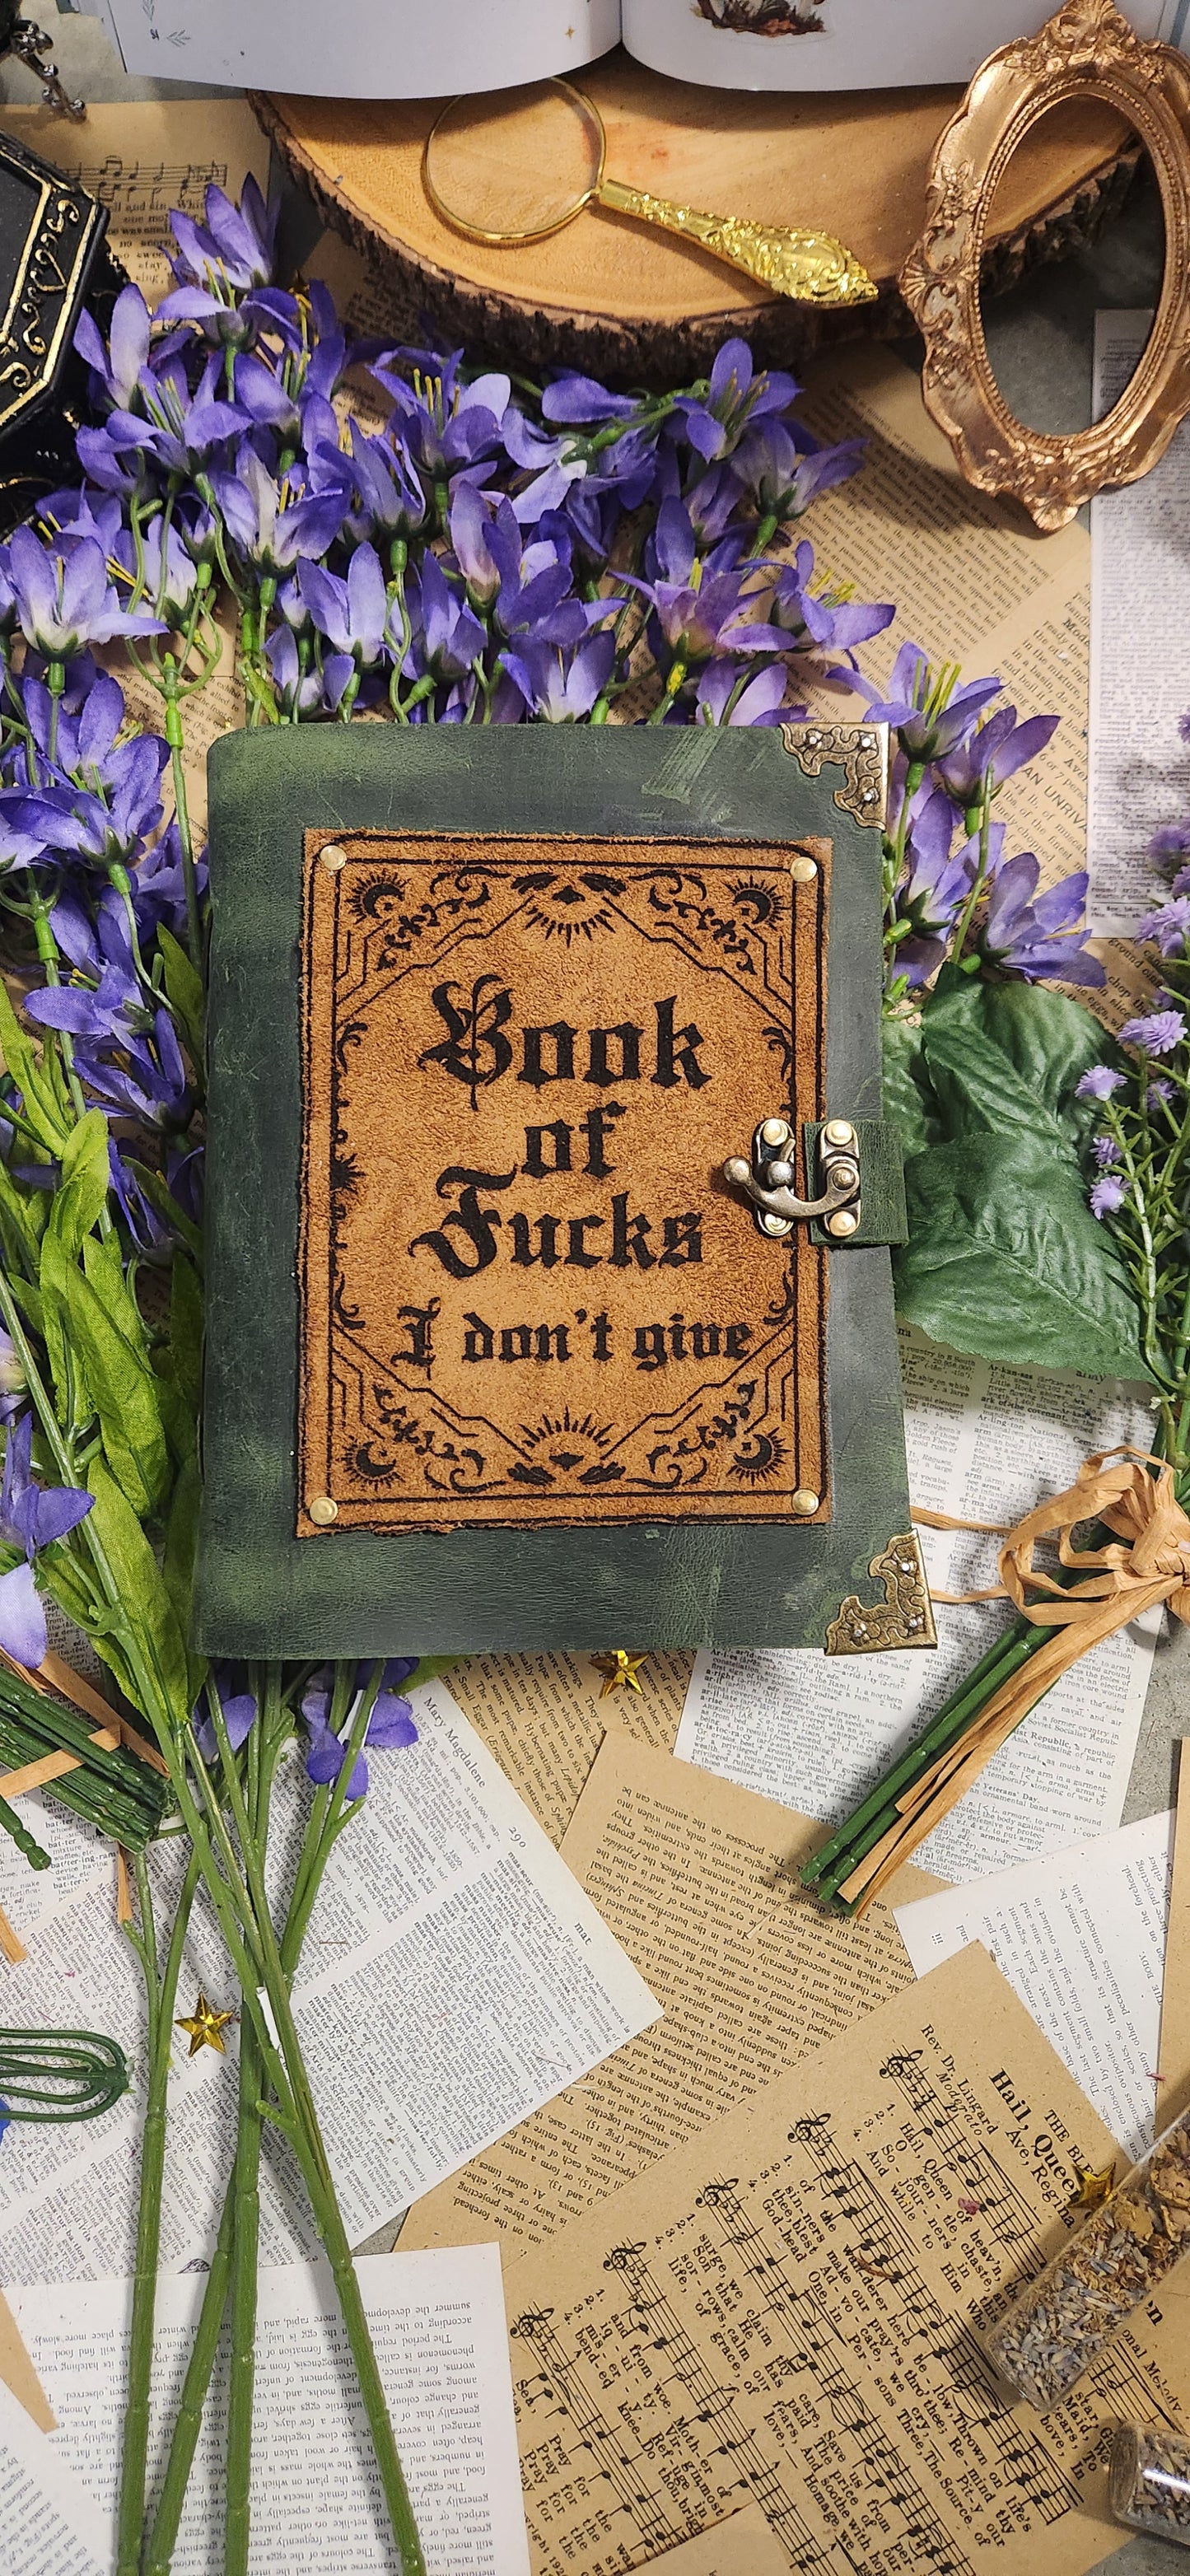 Book of Fucks I don't give leather journal